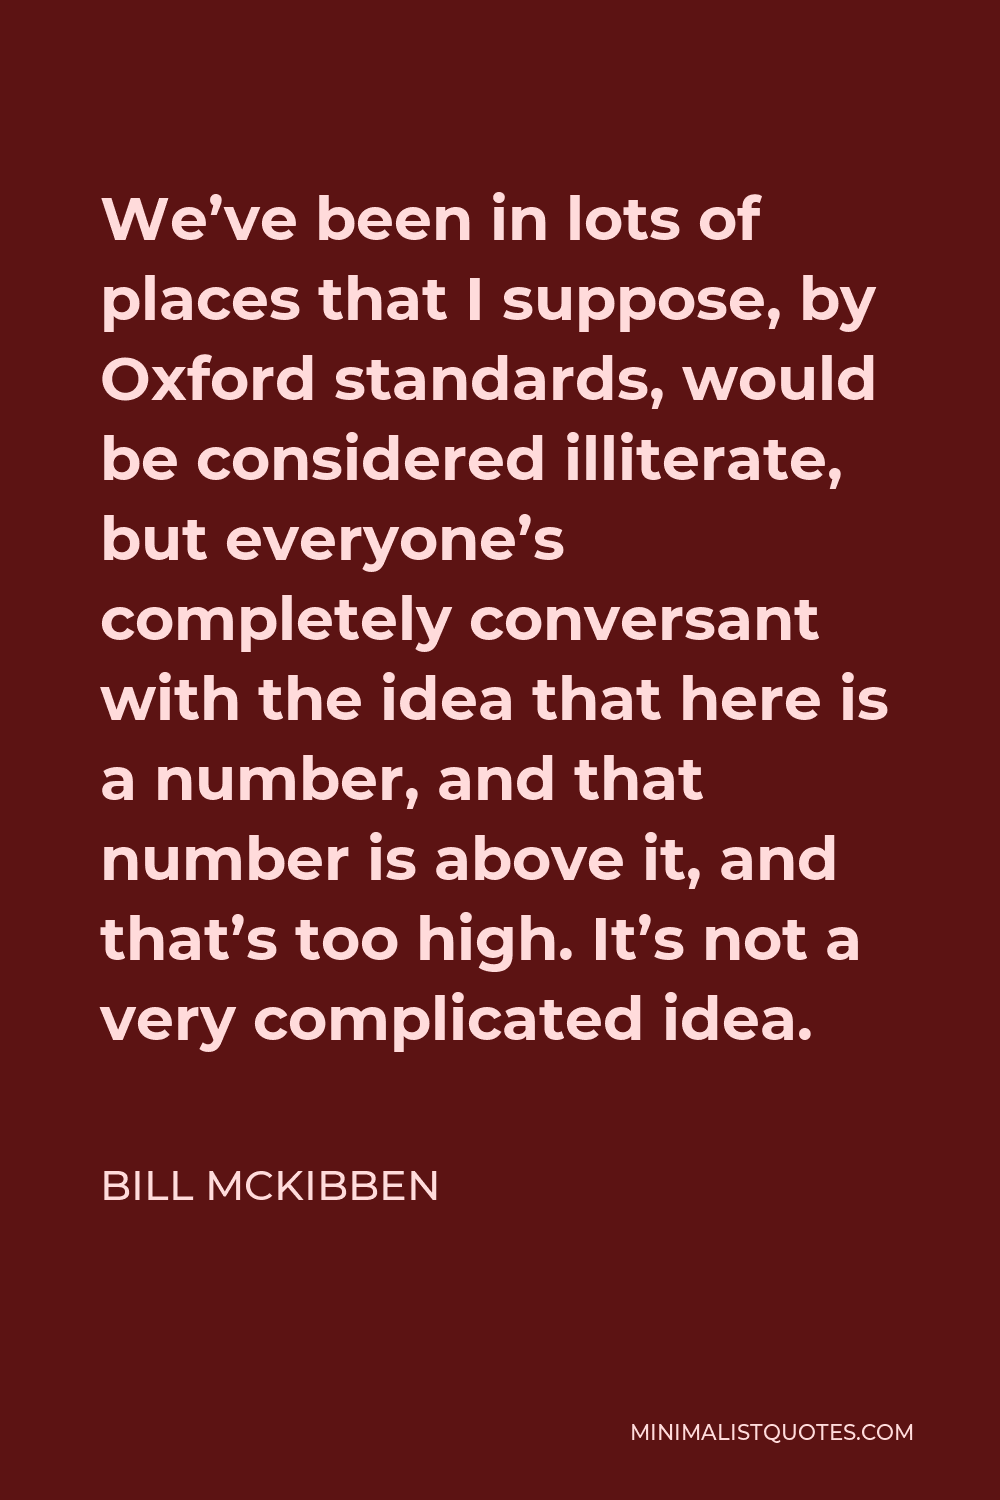 Bill McKibben Quote - We’ve been in lots of places that I suppose, by Oxford standards, would be considered illiterate, but everyone’s completely conversant with the idea that here is a number, and that number is above it, and that’s too high. It’s not a very complicated idea.